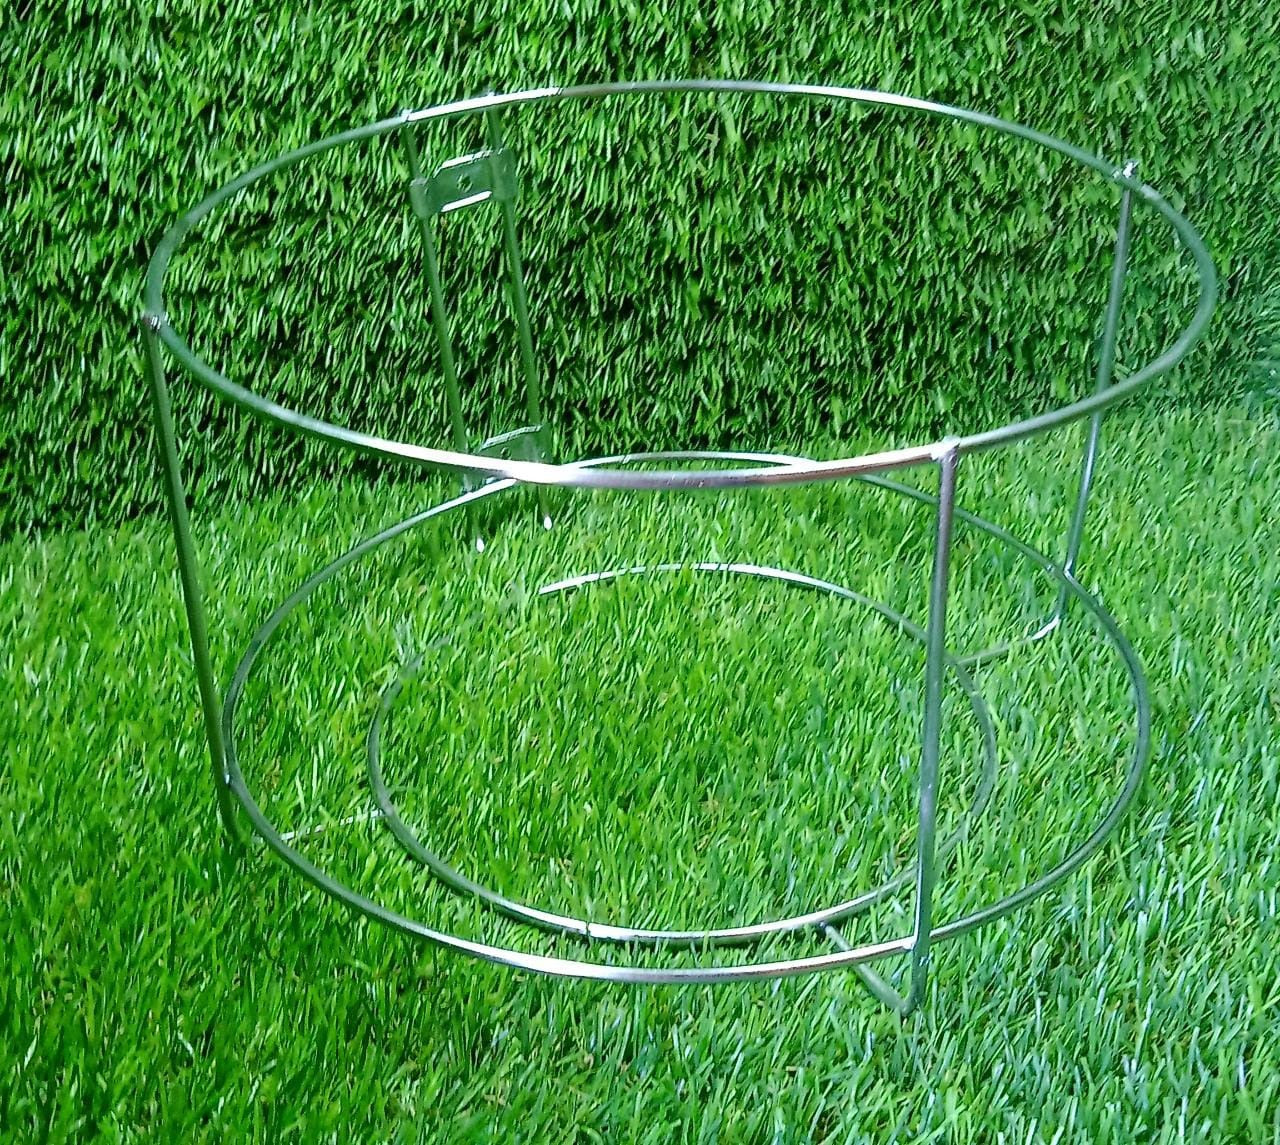 2791 Stainless steel Dustbin Stand For Holding Dustbin Easily Without Any Problem. DeoDap